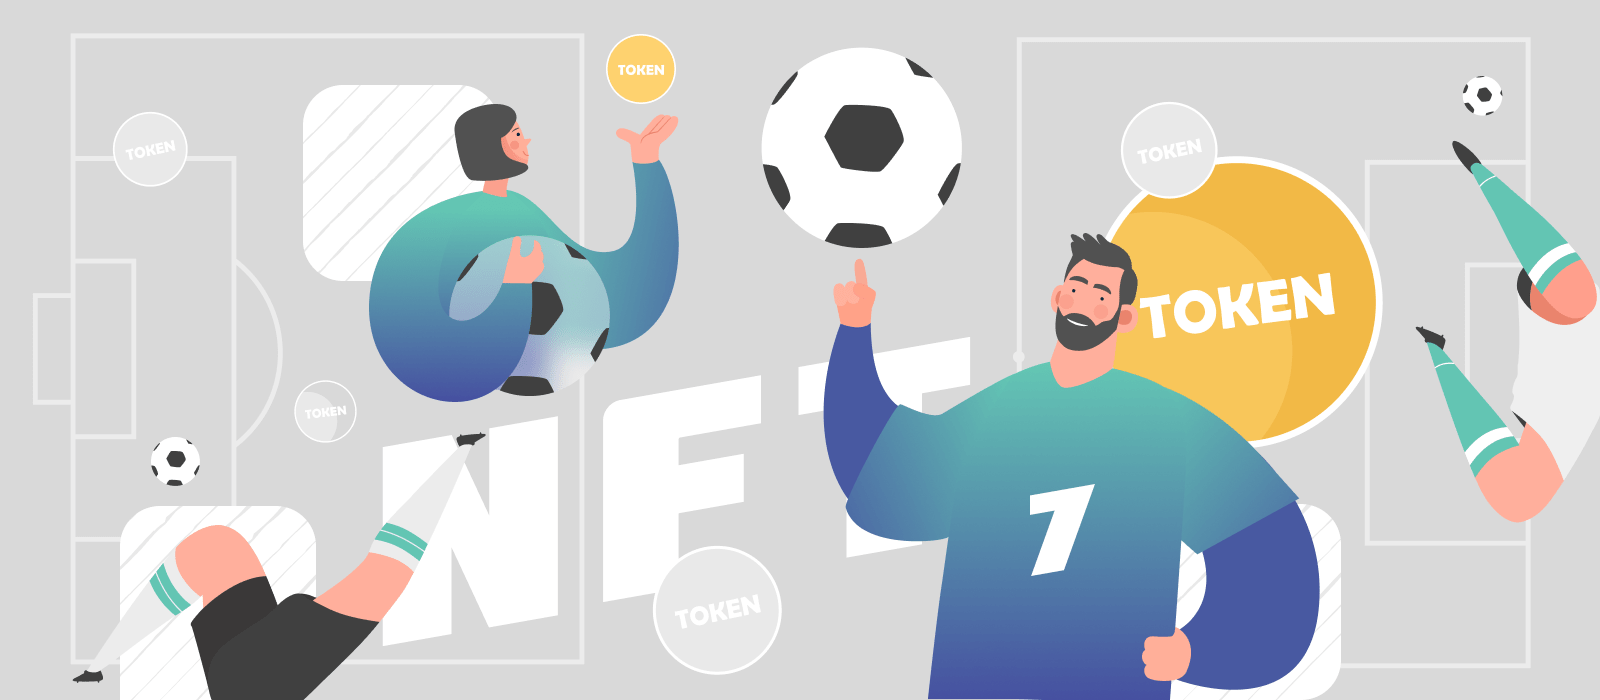 Soccer players next to NFT and tokens